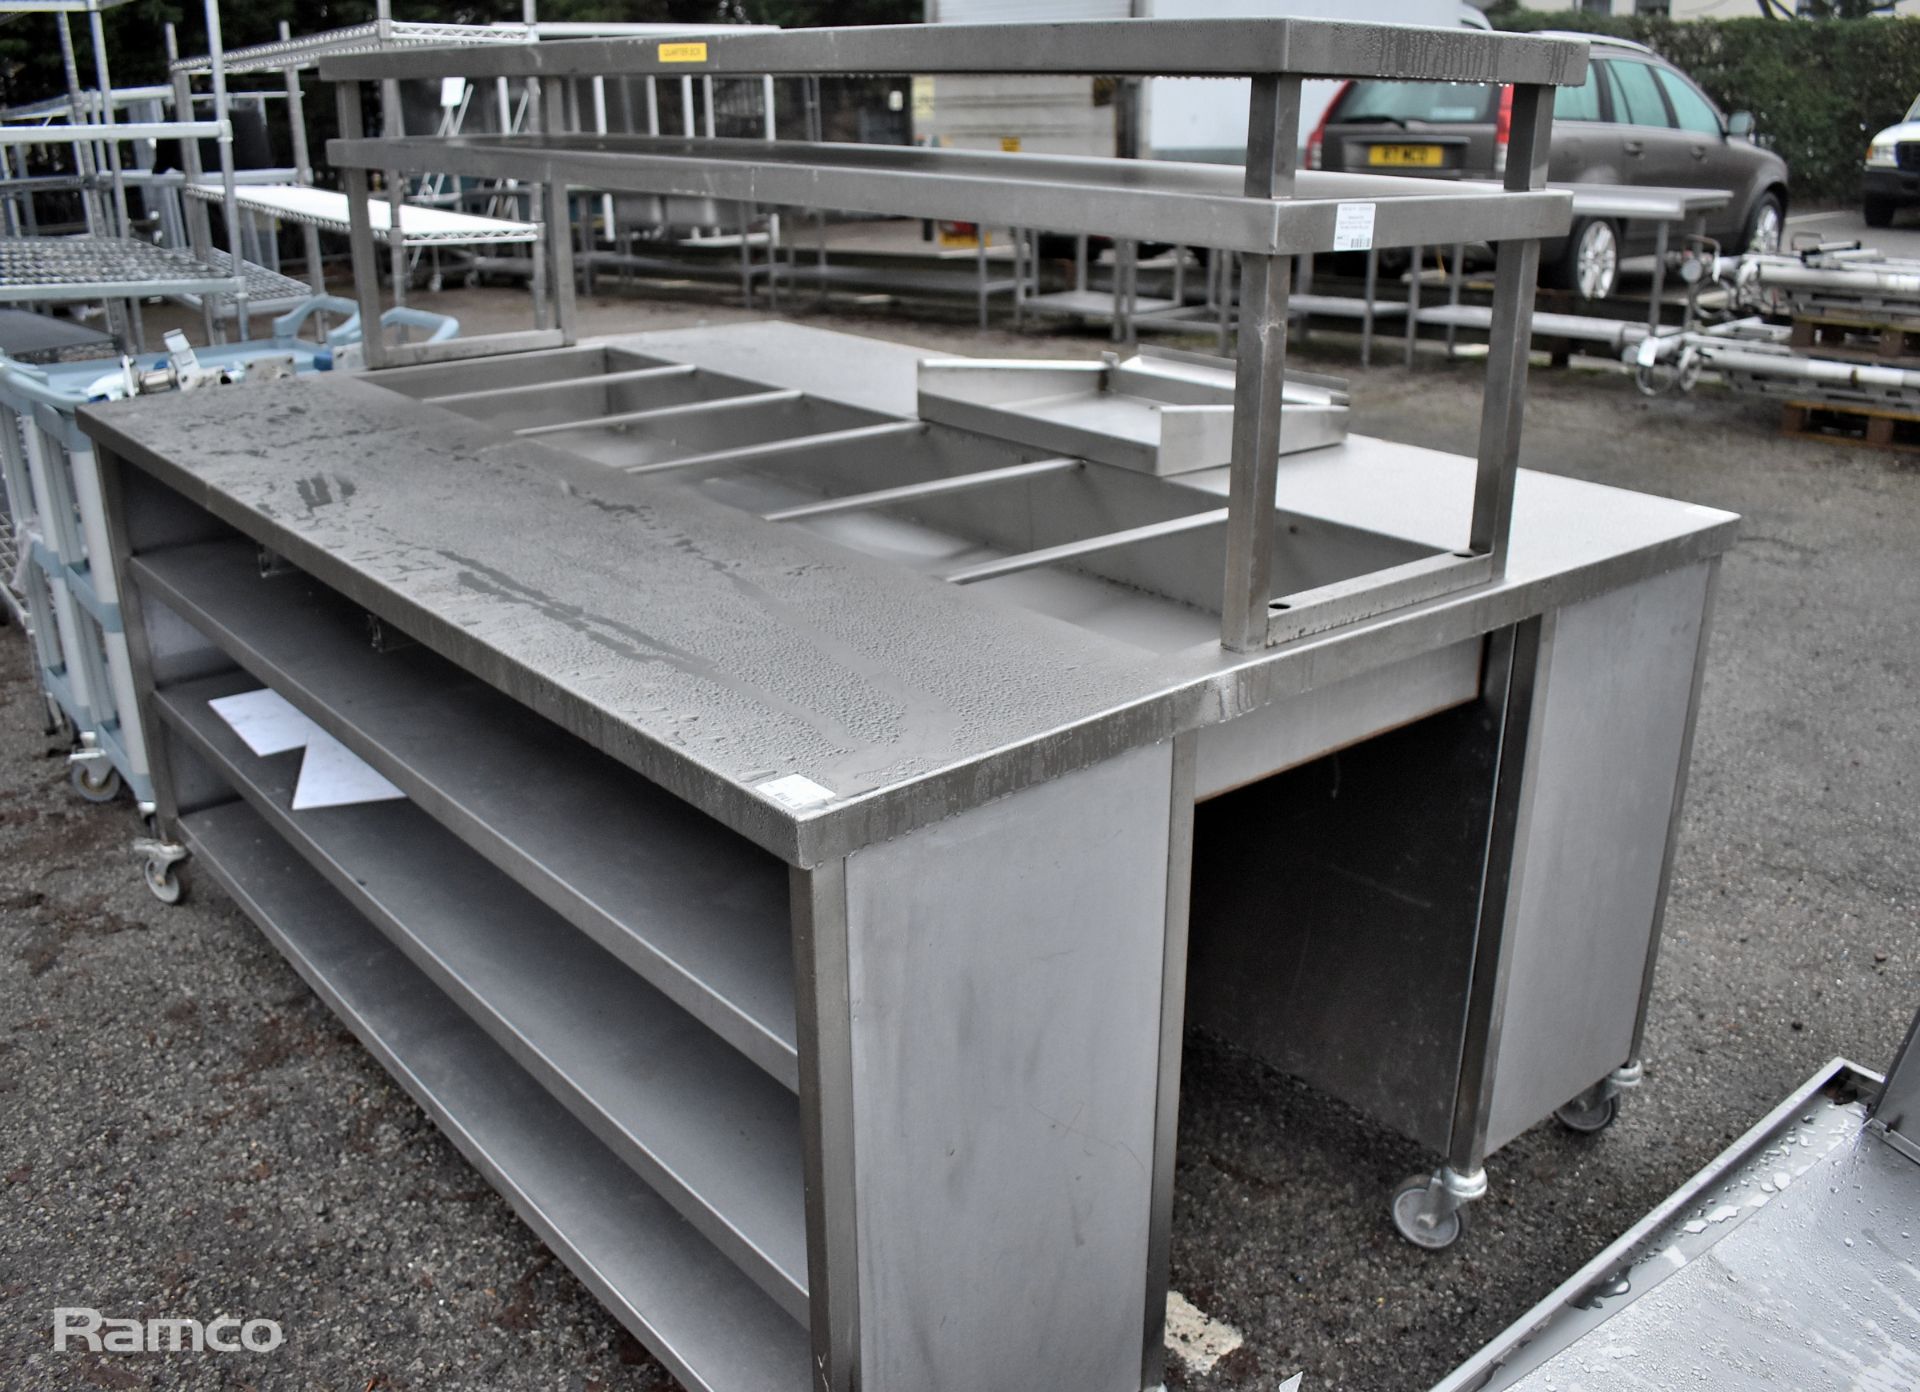 Stainless steel Prep station/Service station - L210 x W140 x H200 approximately - Image 6 of 7